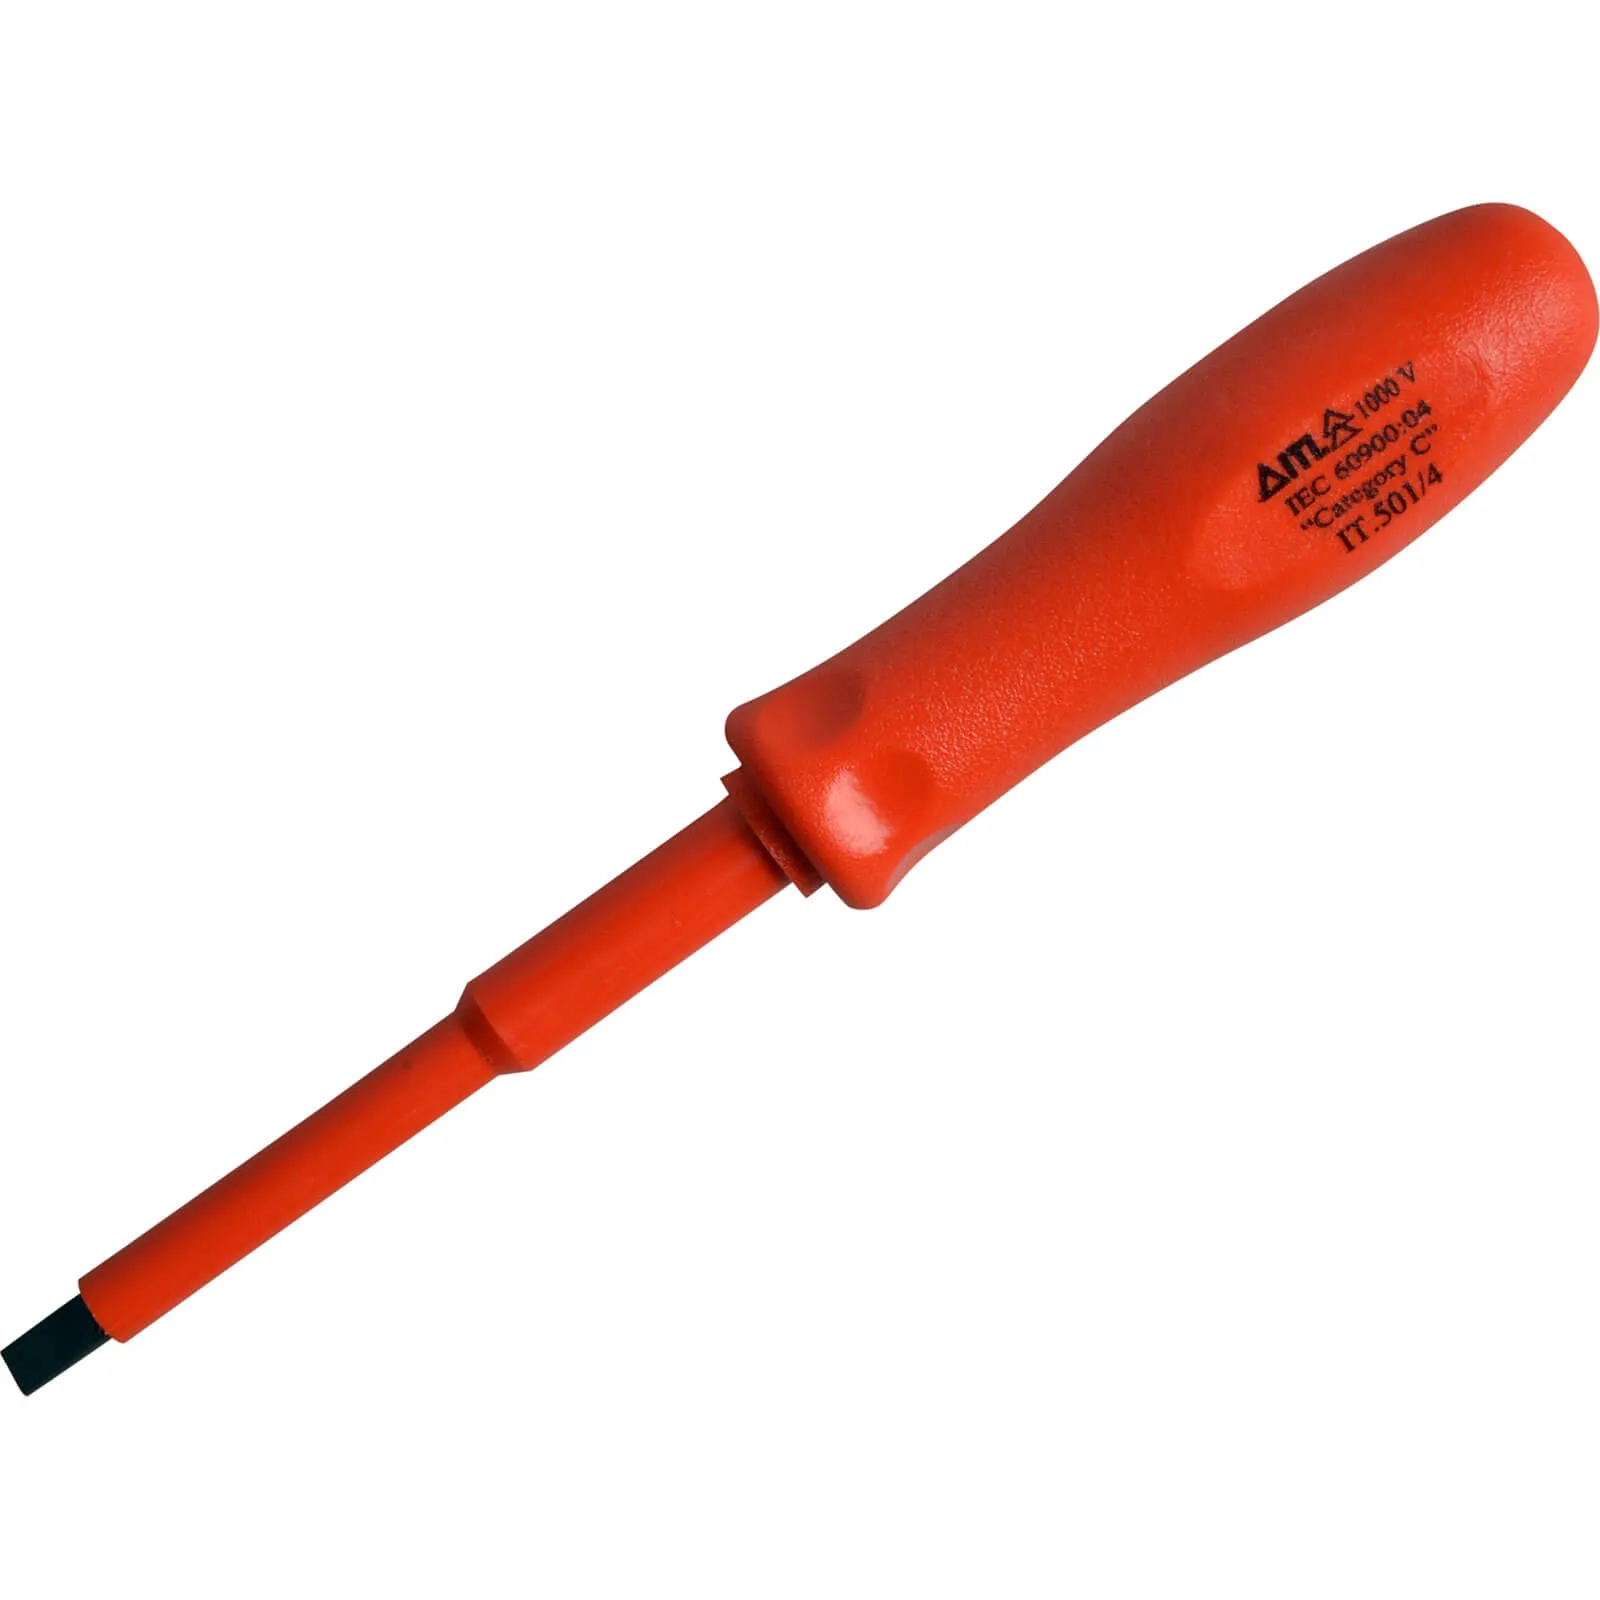 ITL Insulated Parallel Slotted Engineers Screwdriver - 6.5mm, 100mm